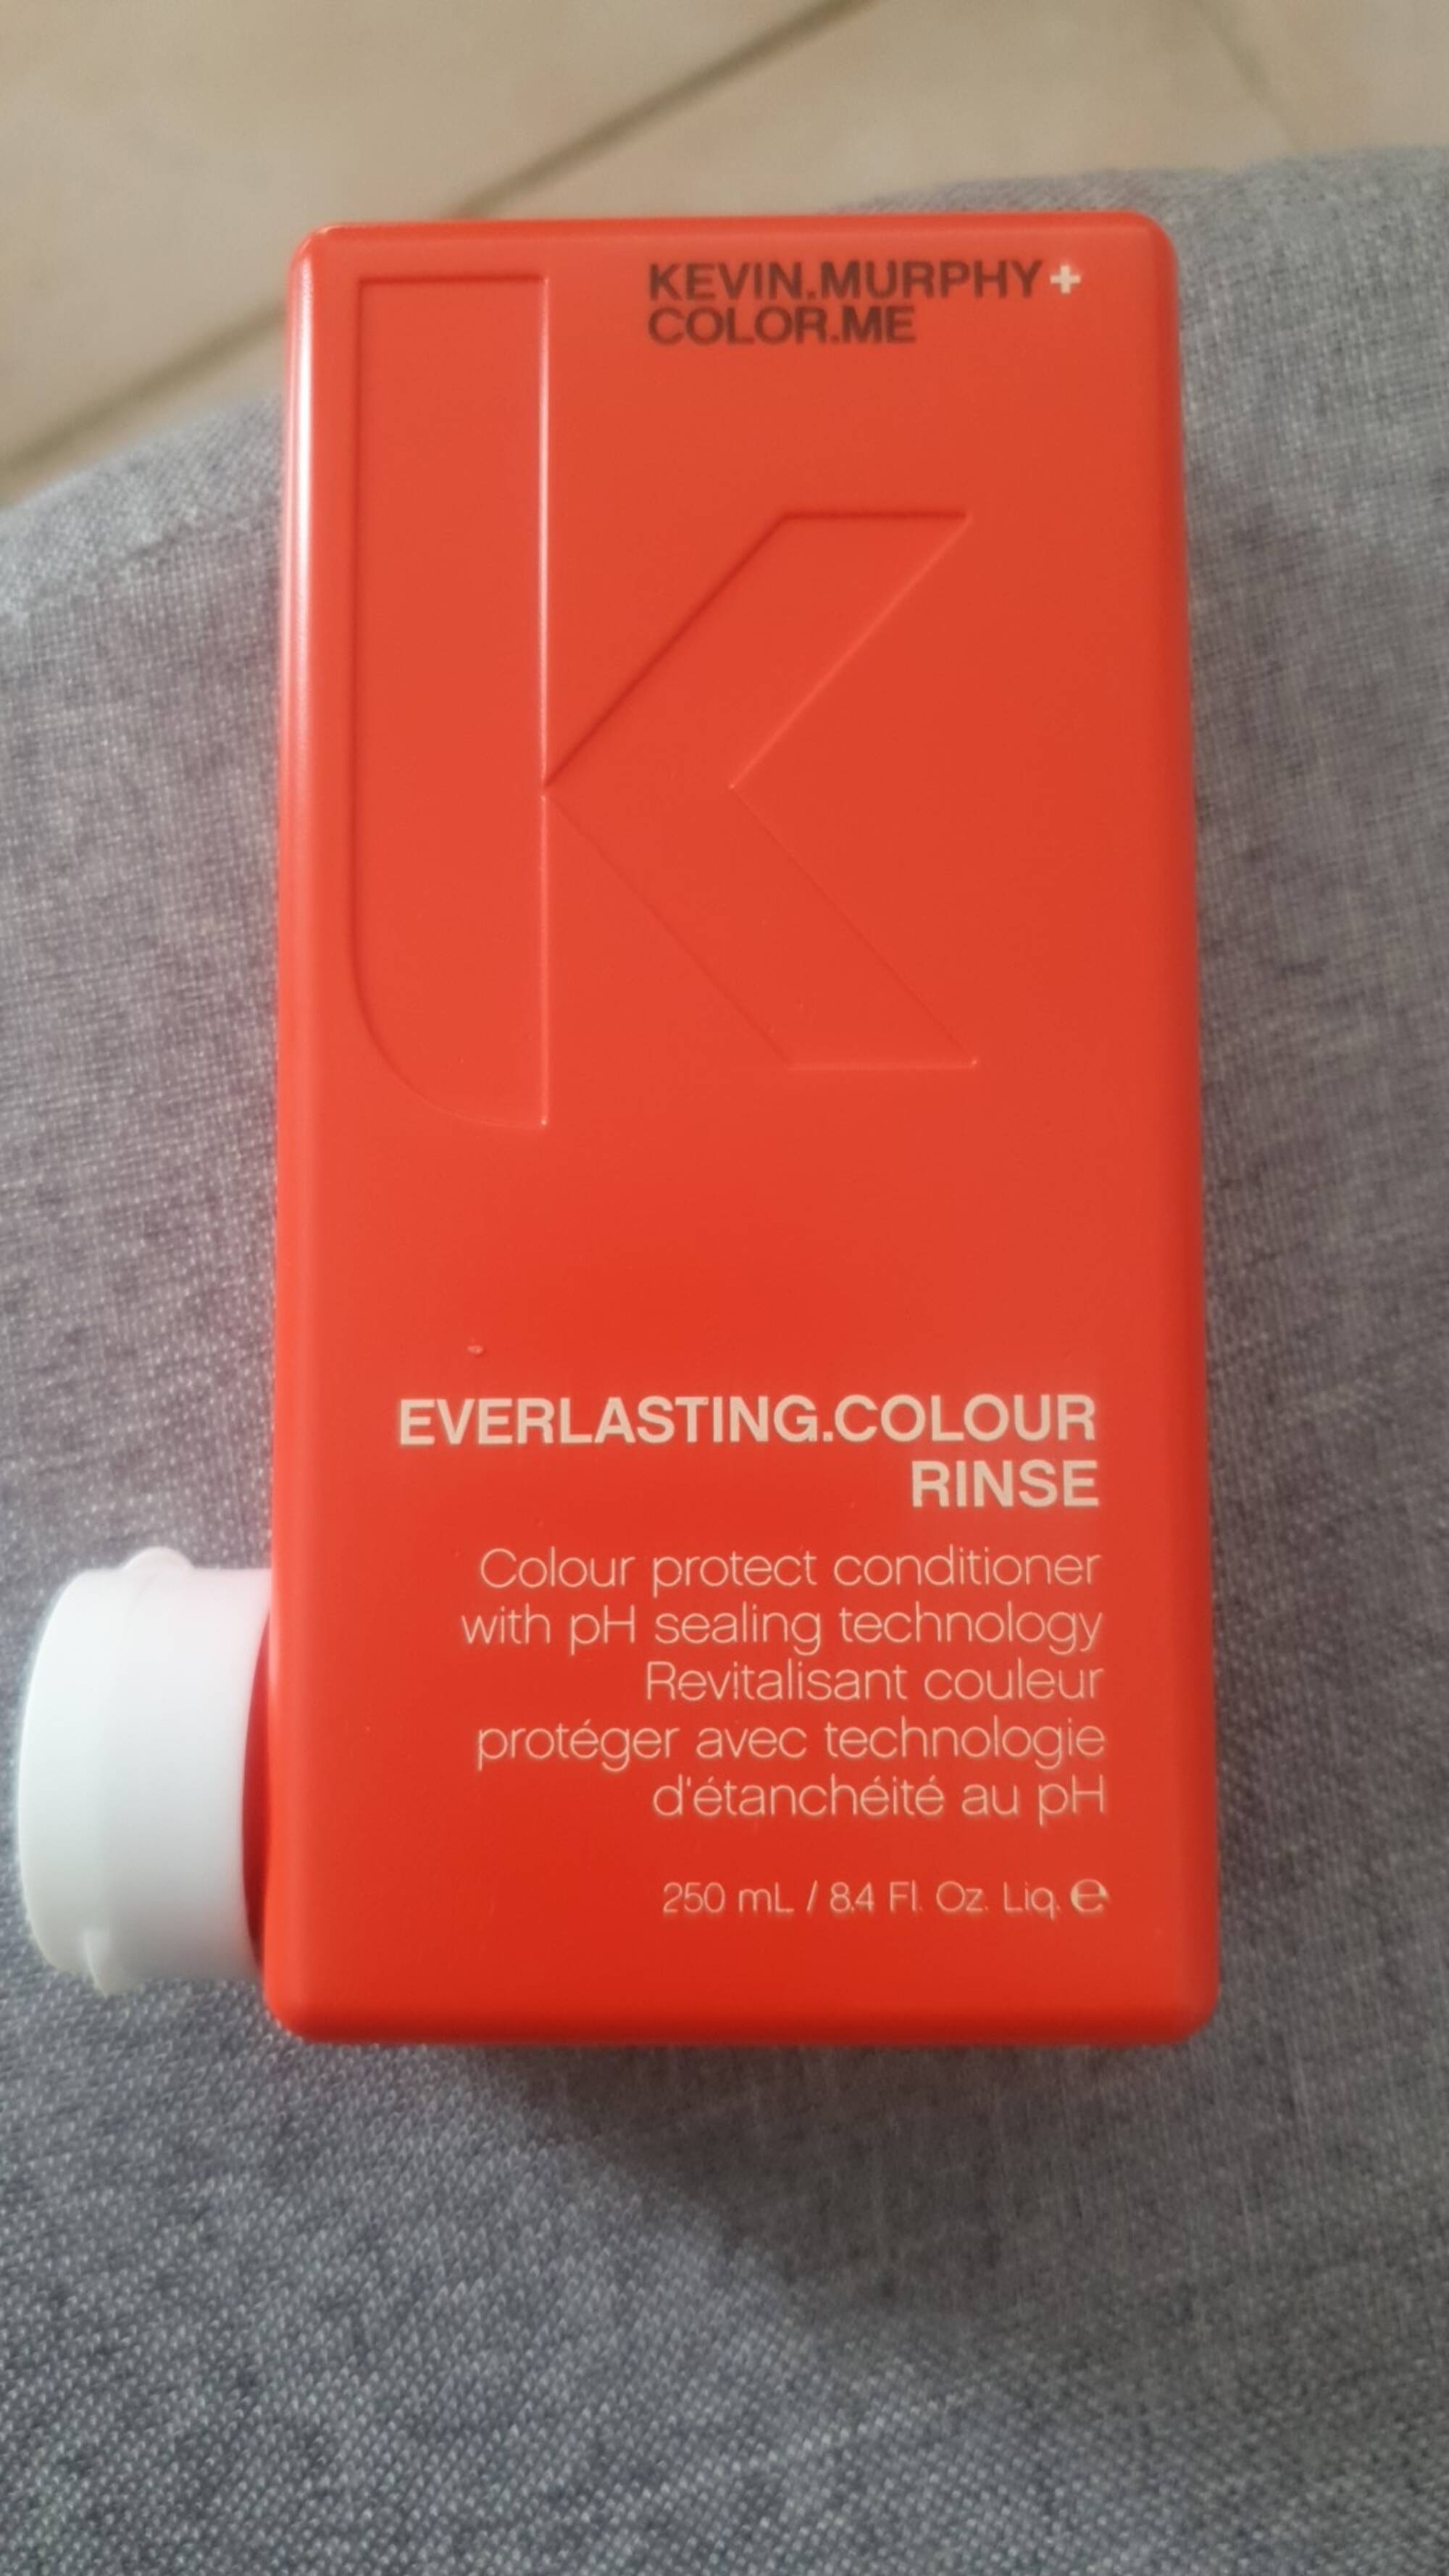 KEVIN MURPHY - Color.me - Everlasting.colour rinse